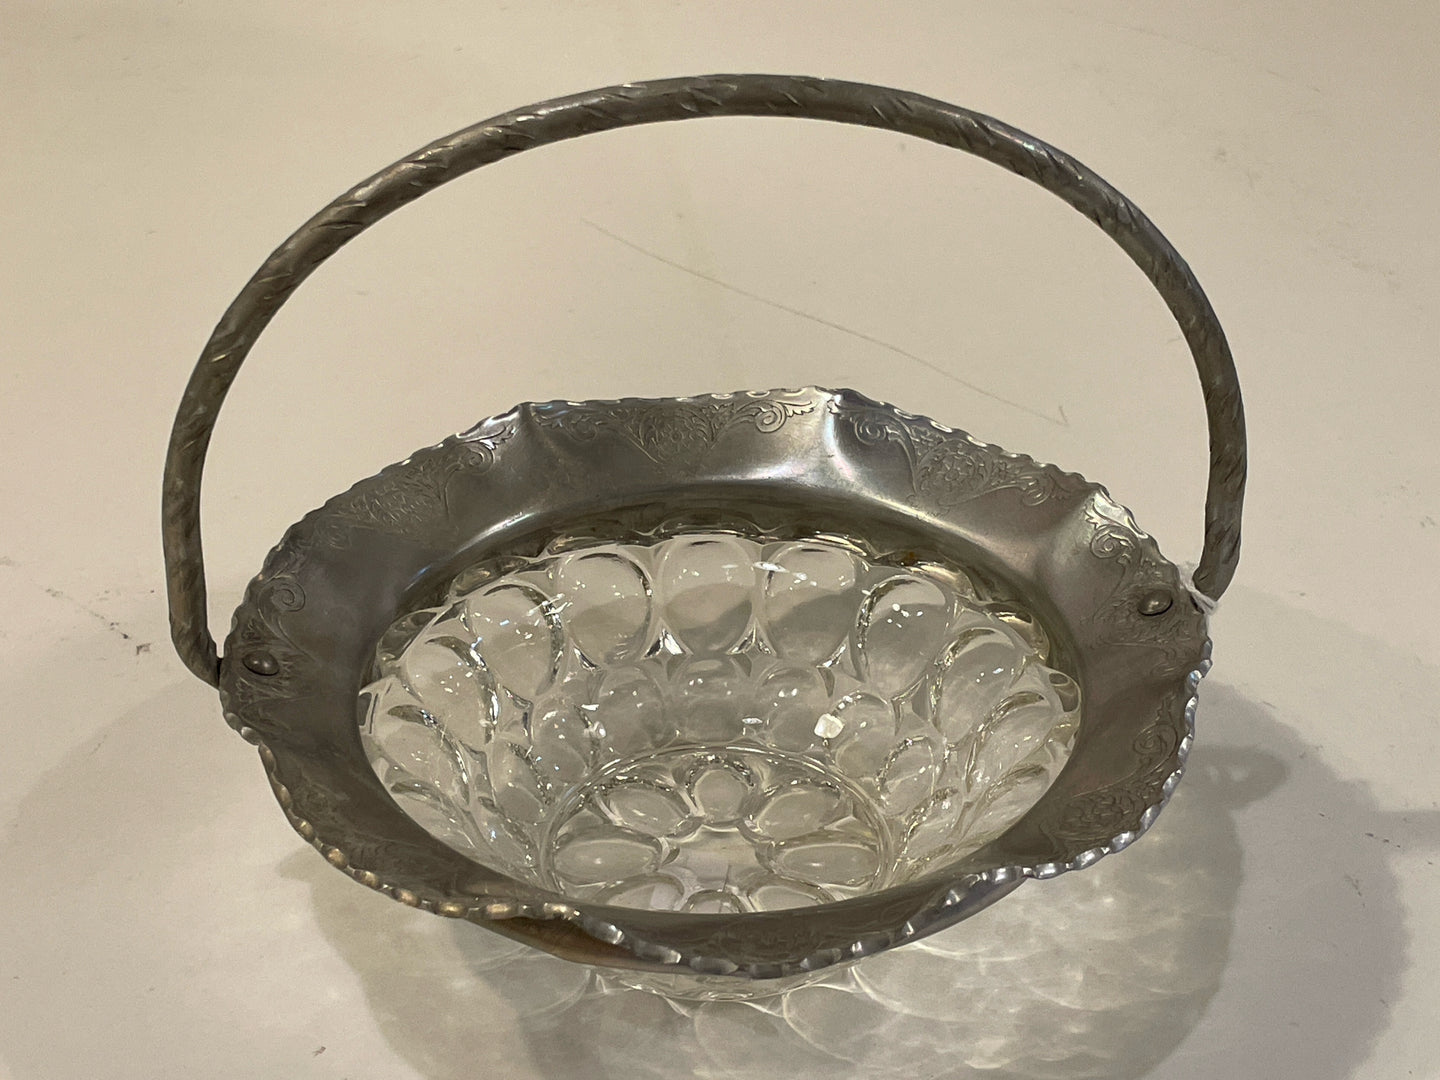 Glass Basket with Silver Trim and Handle